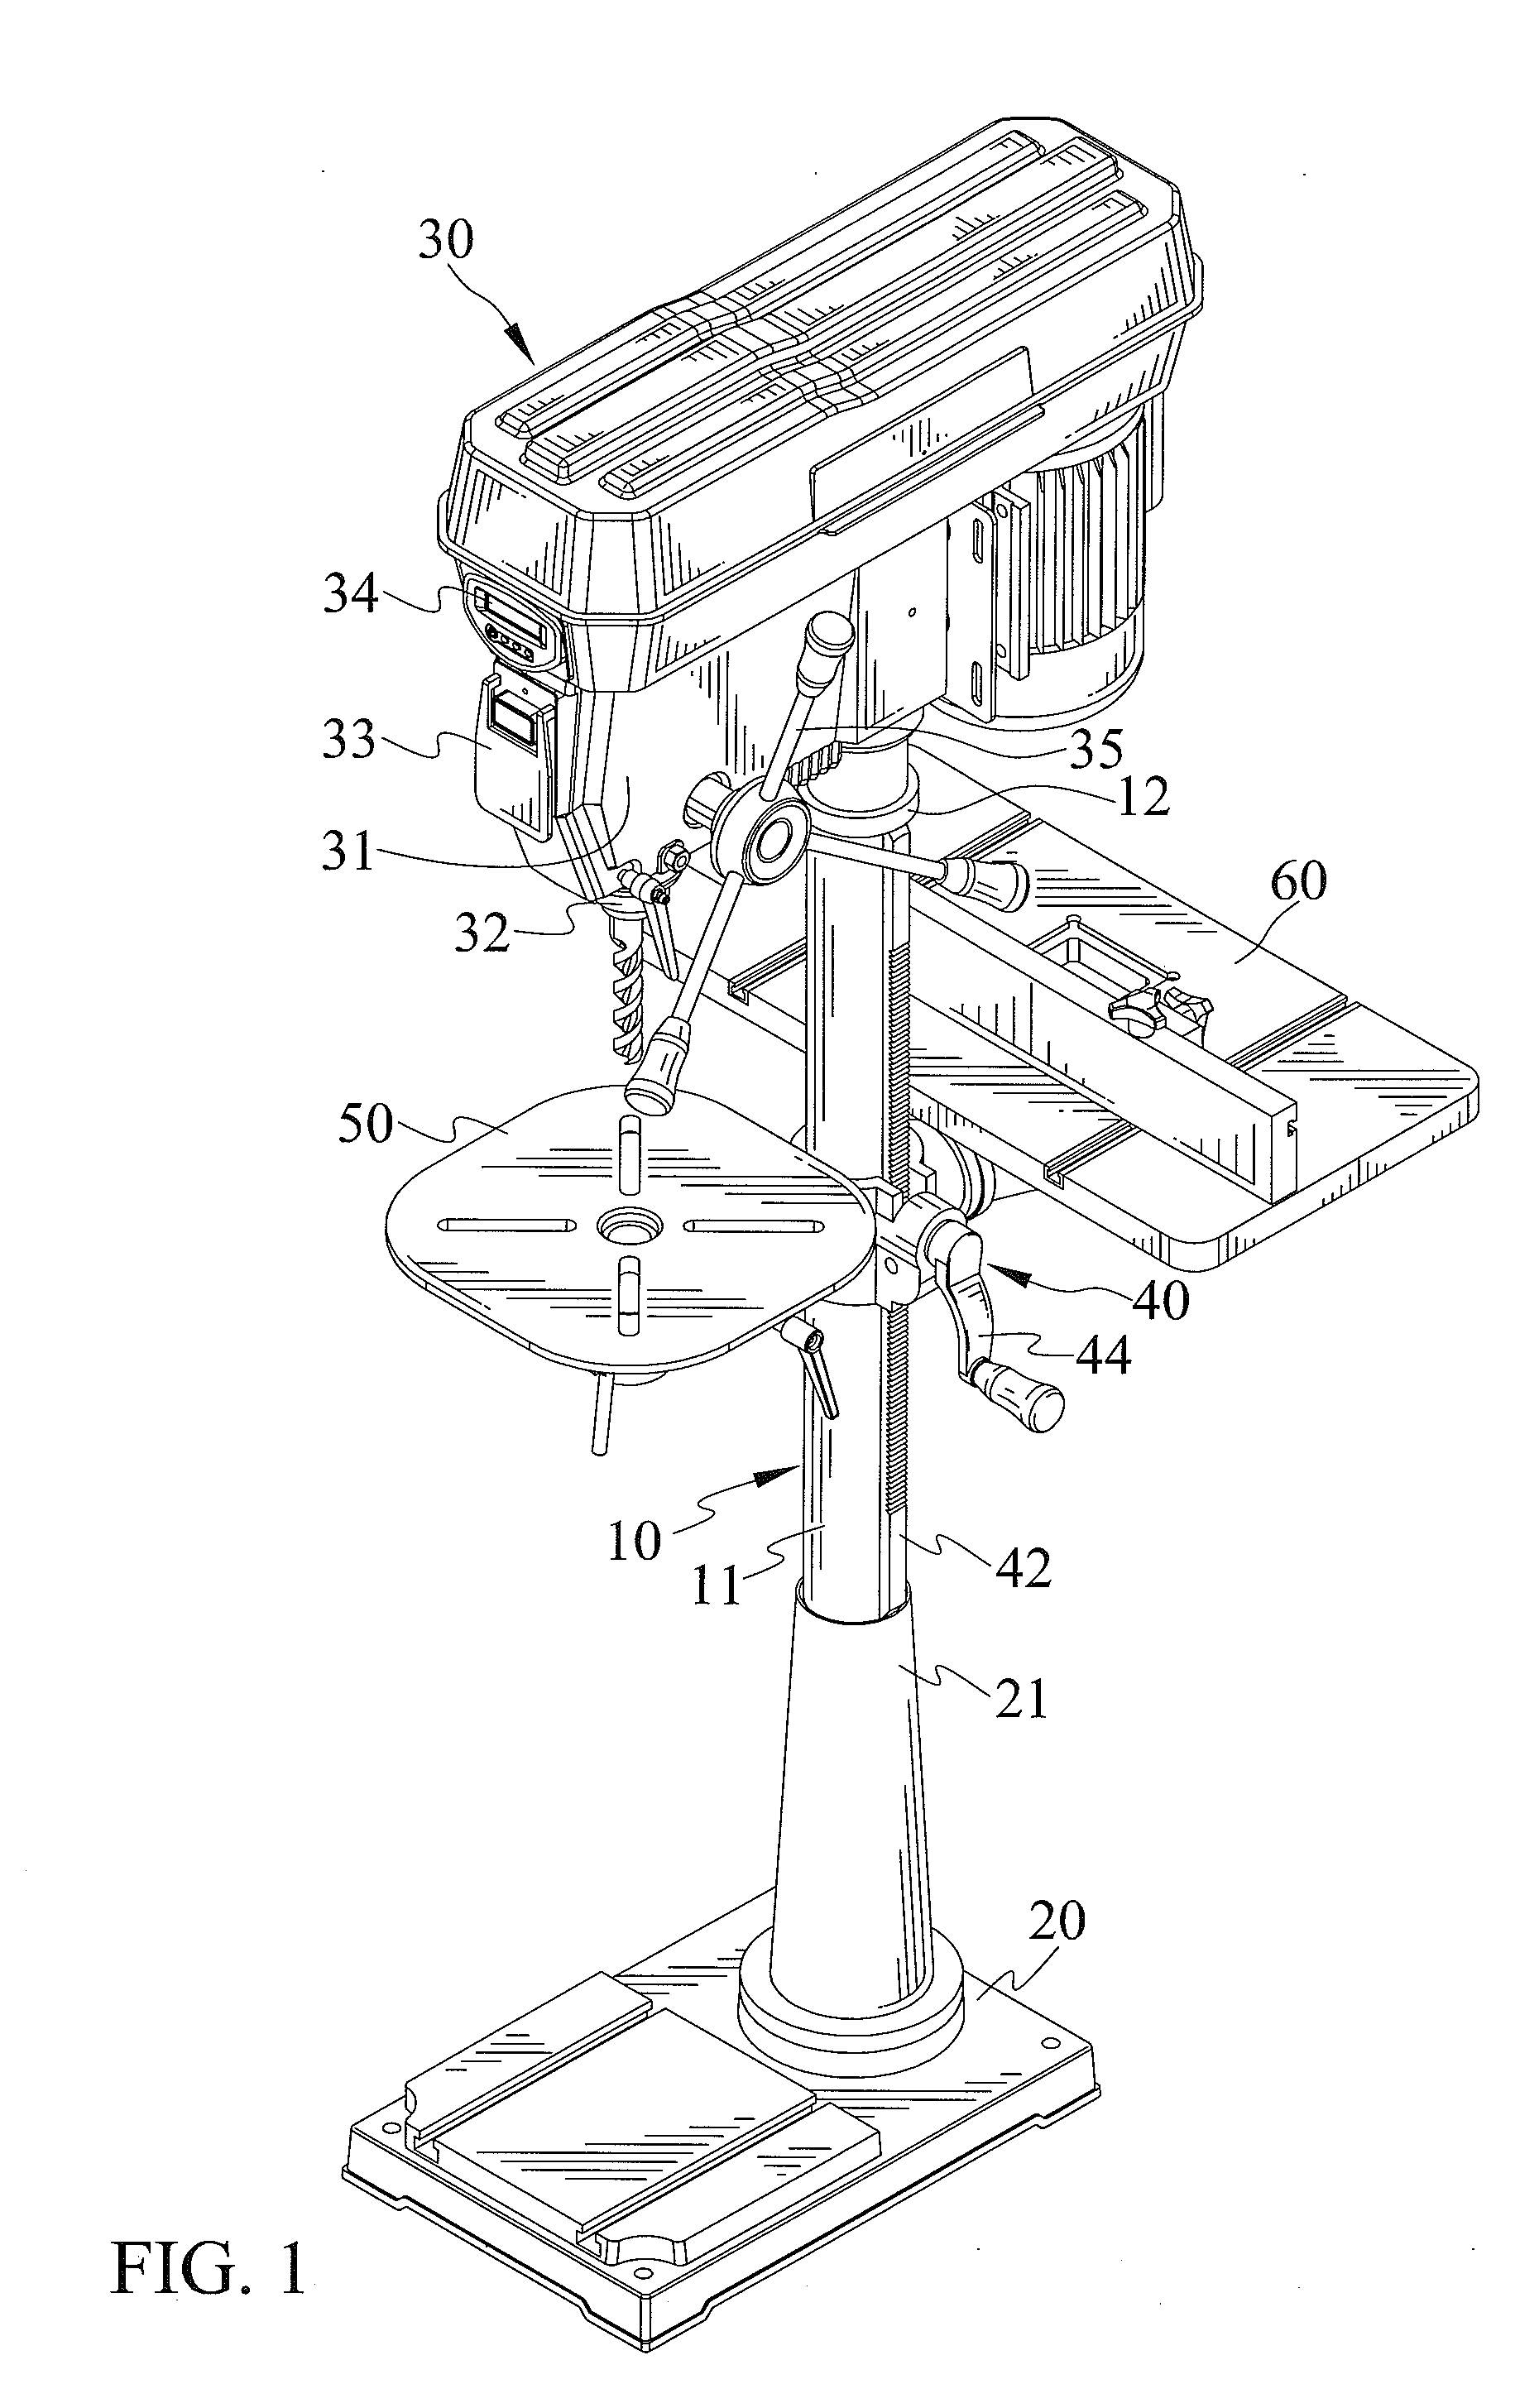 Drill Press with Pivotable Table